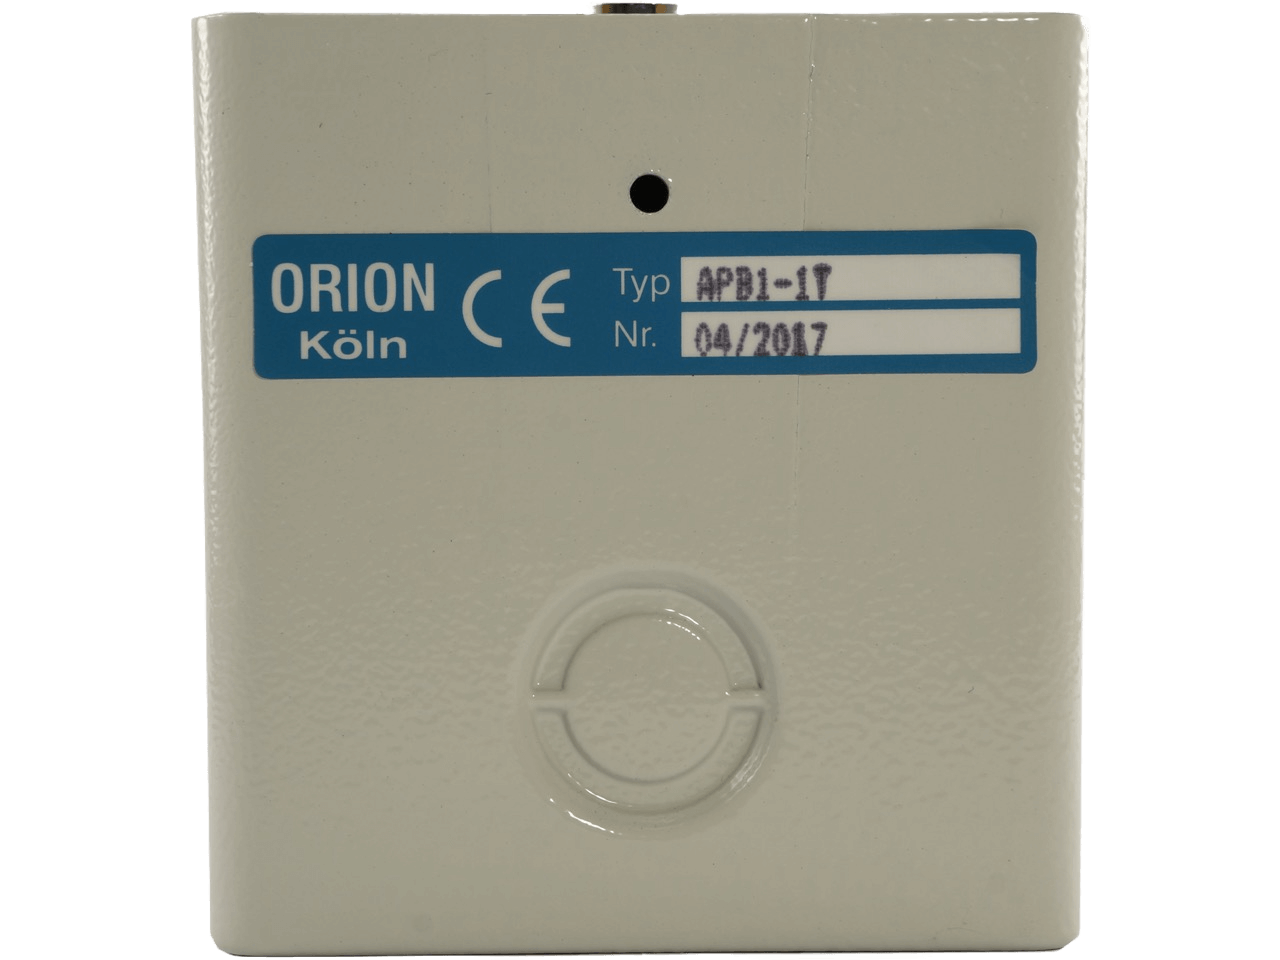 Orion APB 1-1T Key-Switch Wall-Mount 1-direction